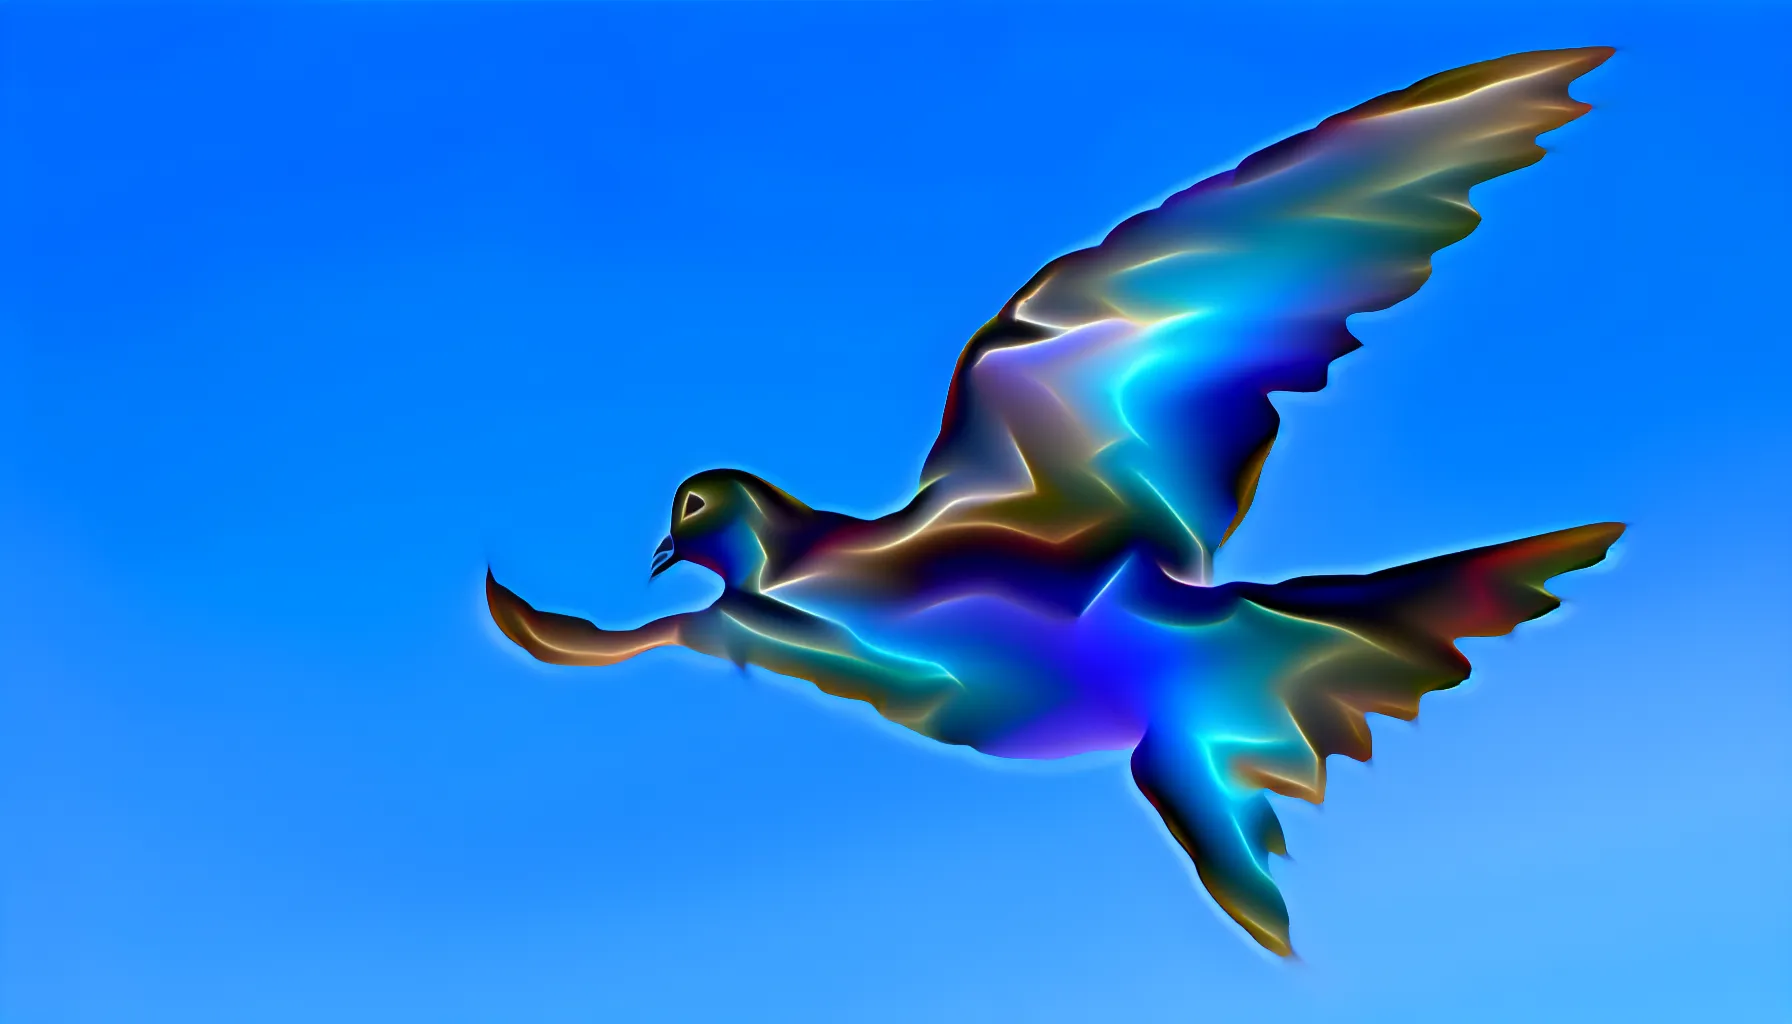 Abstract image depicting freedom and flexibility